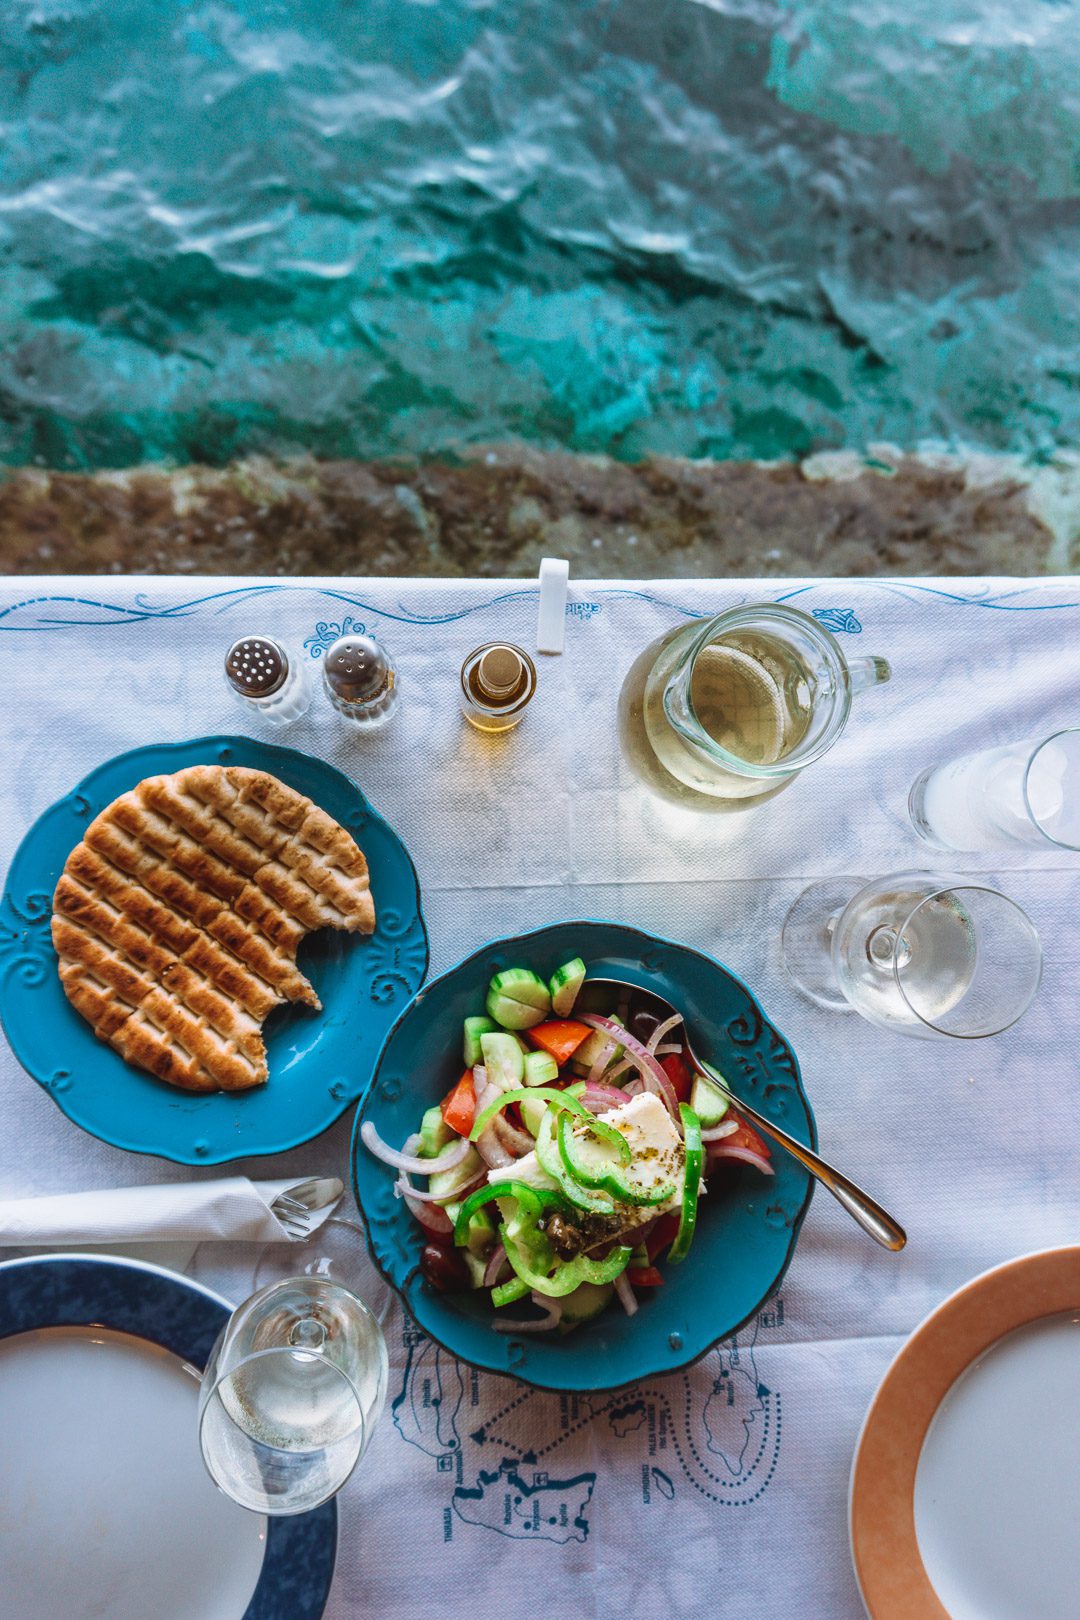 Looking down at an oceanside table with wine, pita bread, and a greek salad at the Seafood Tavern in Ammoundi Bay on Santorini Island